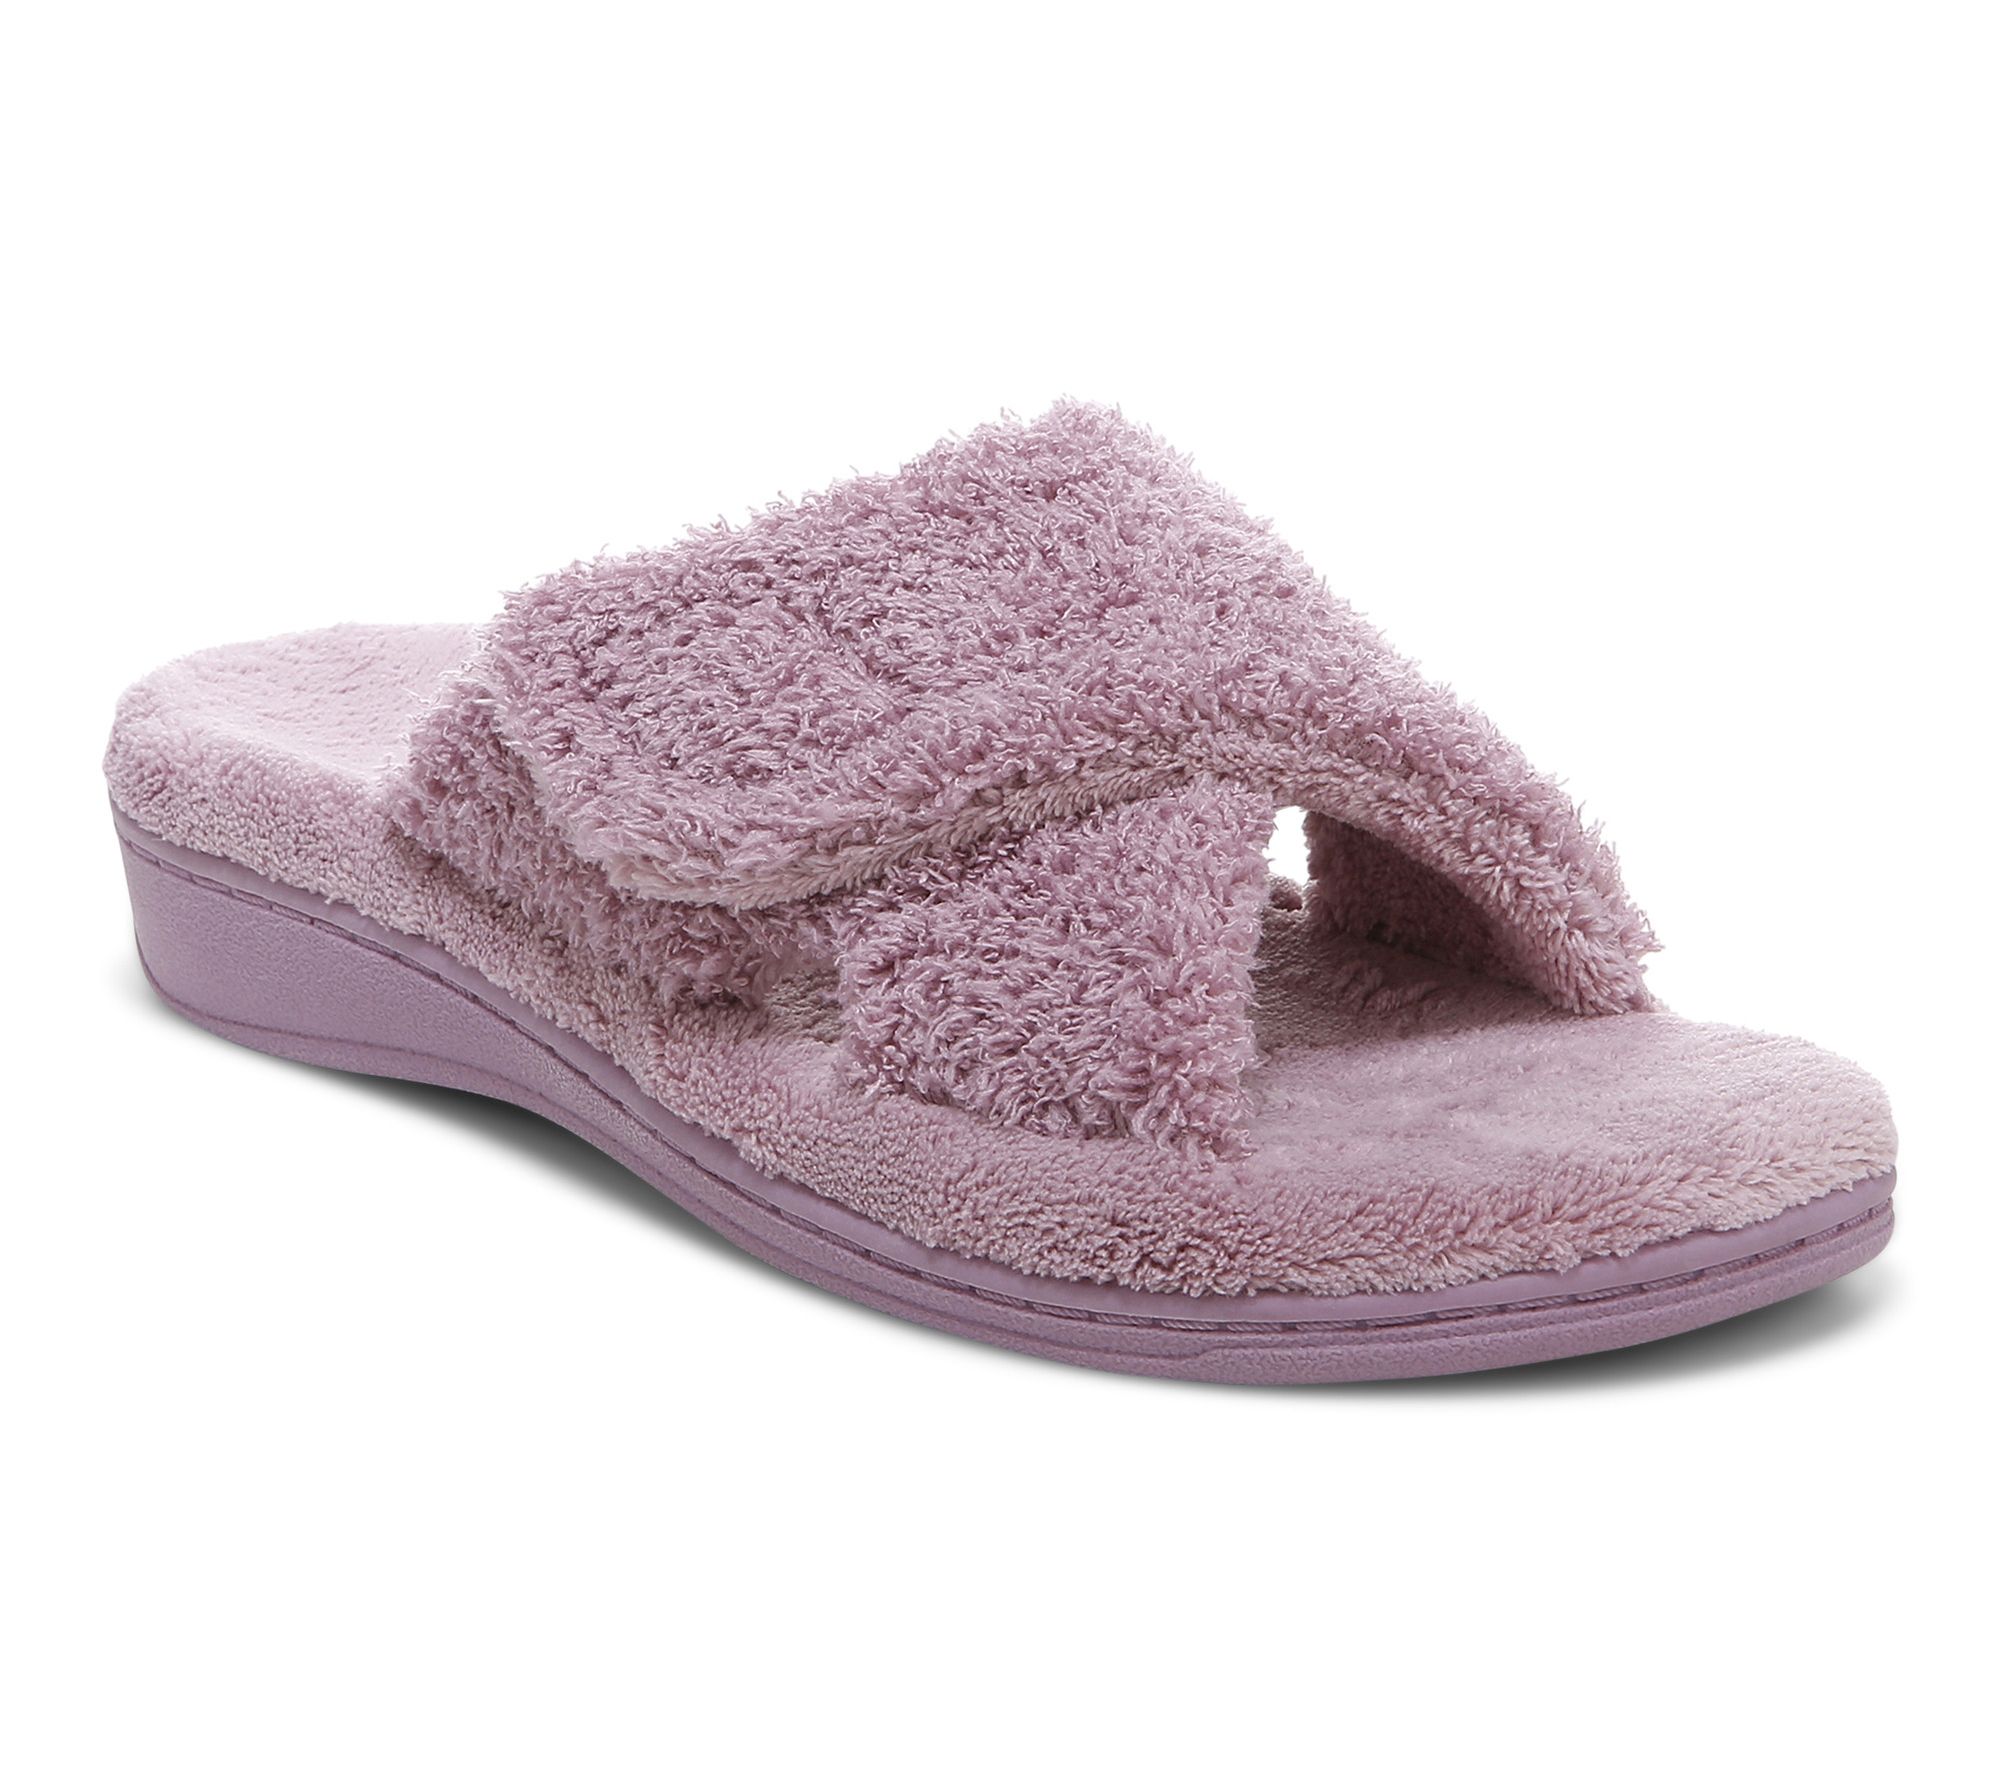 Vionic Slippers - Style and Practicality